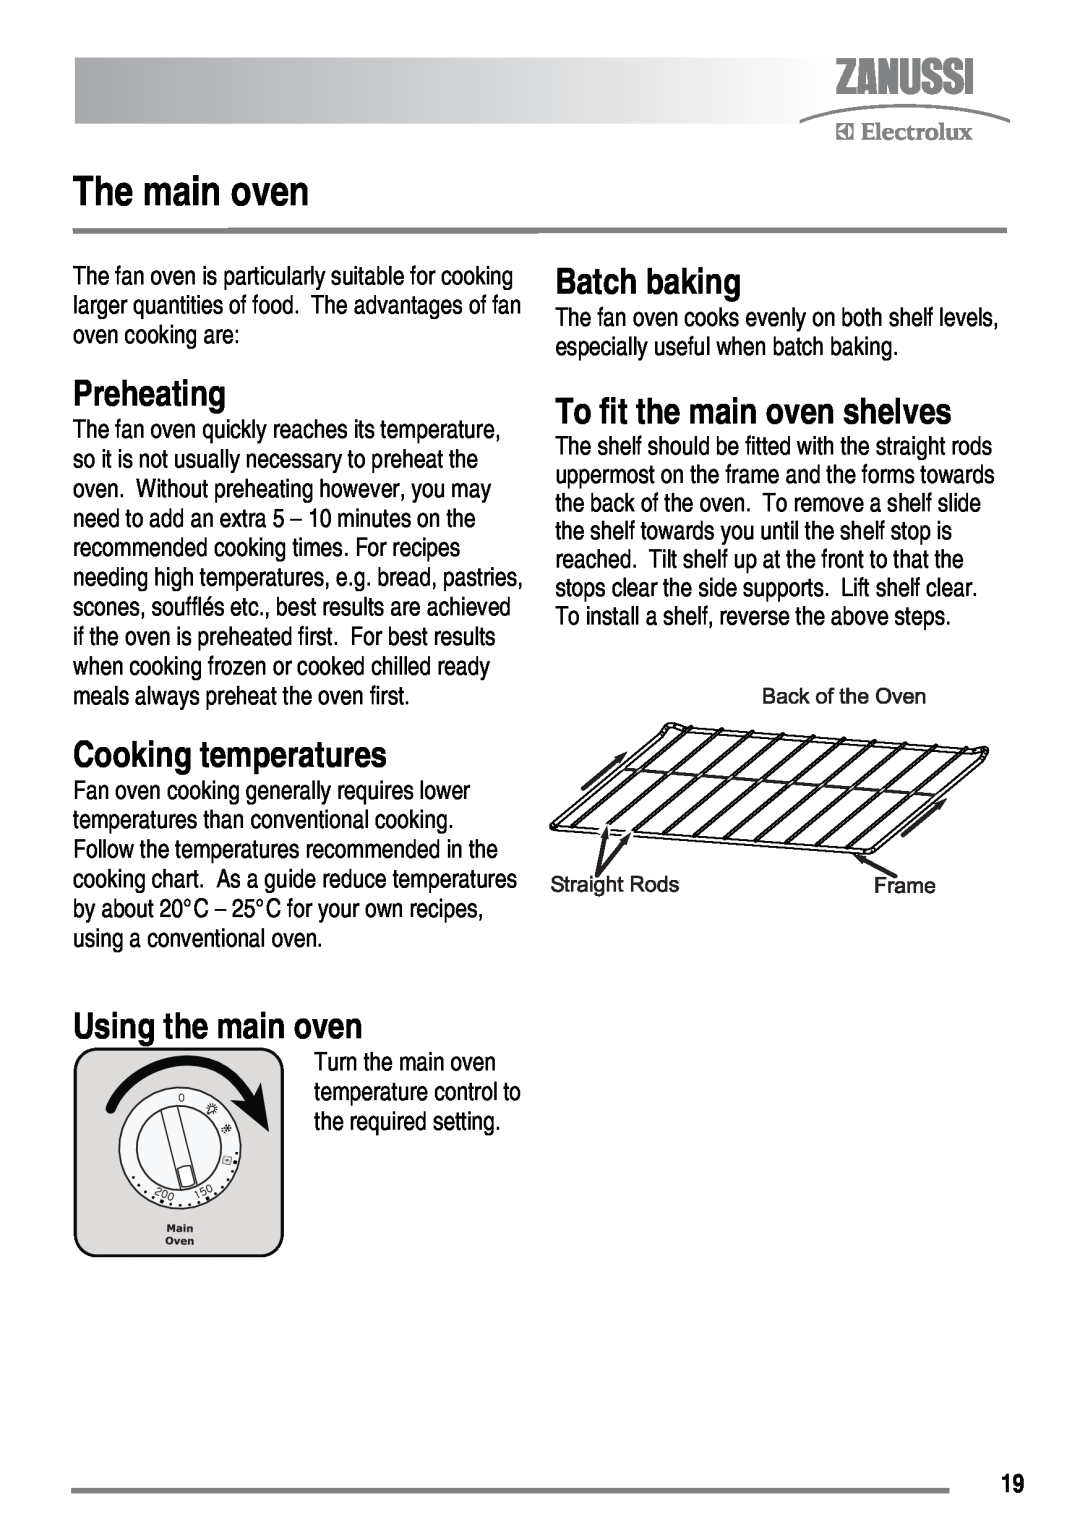 Zanussi ZKC6040 user manual The main oven, Batch baking, Preheating, To fit the main oven shelves, Cooking temperatures 